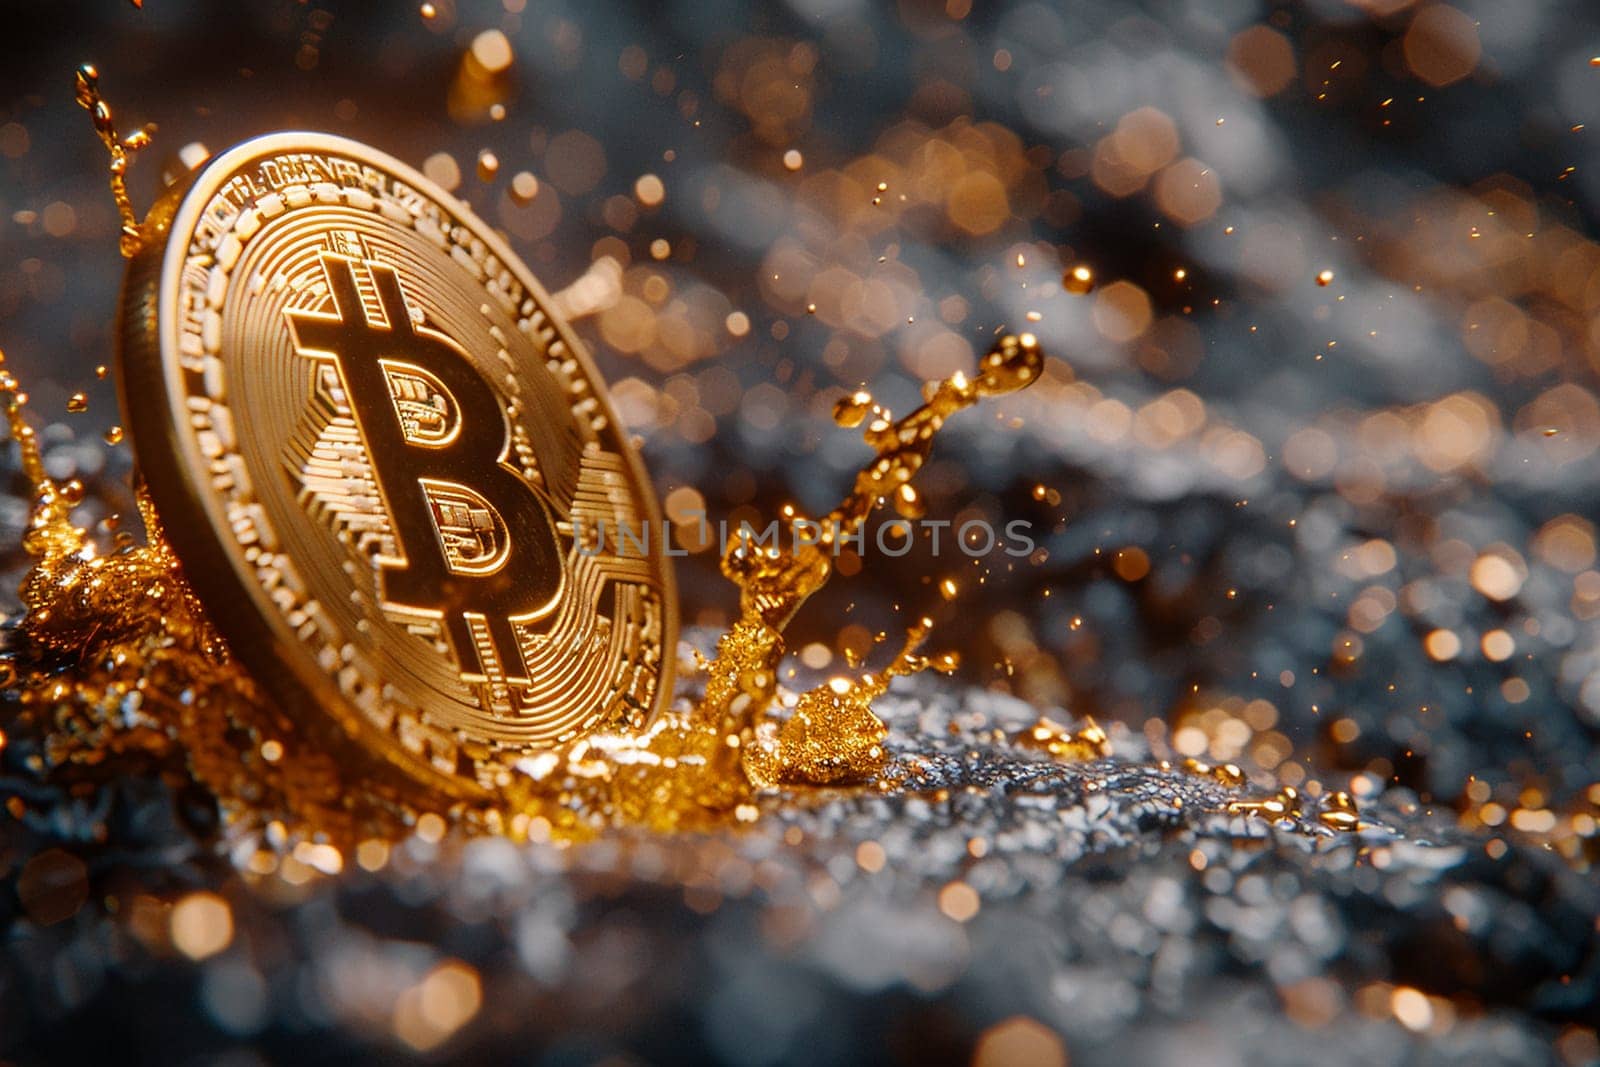 Dramatic depiction of a physical Bitcoin coin crashing into a surface of shimmering liquid gold, symbolizing market volatility and investment risks.